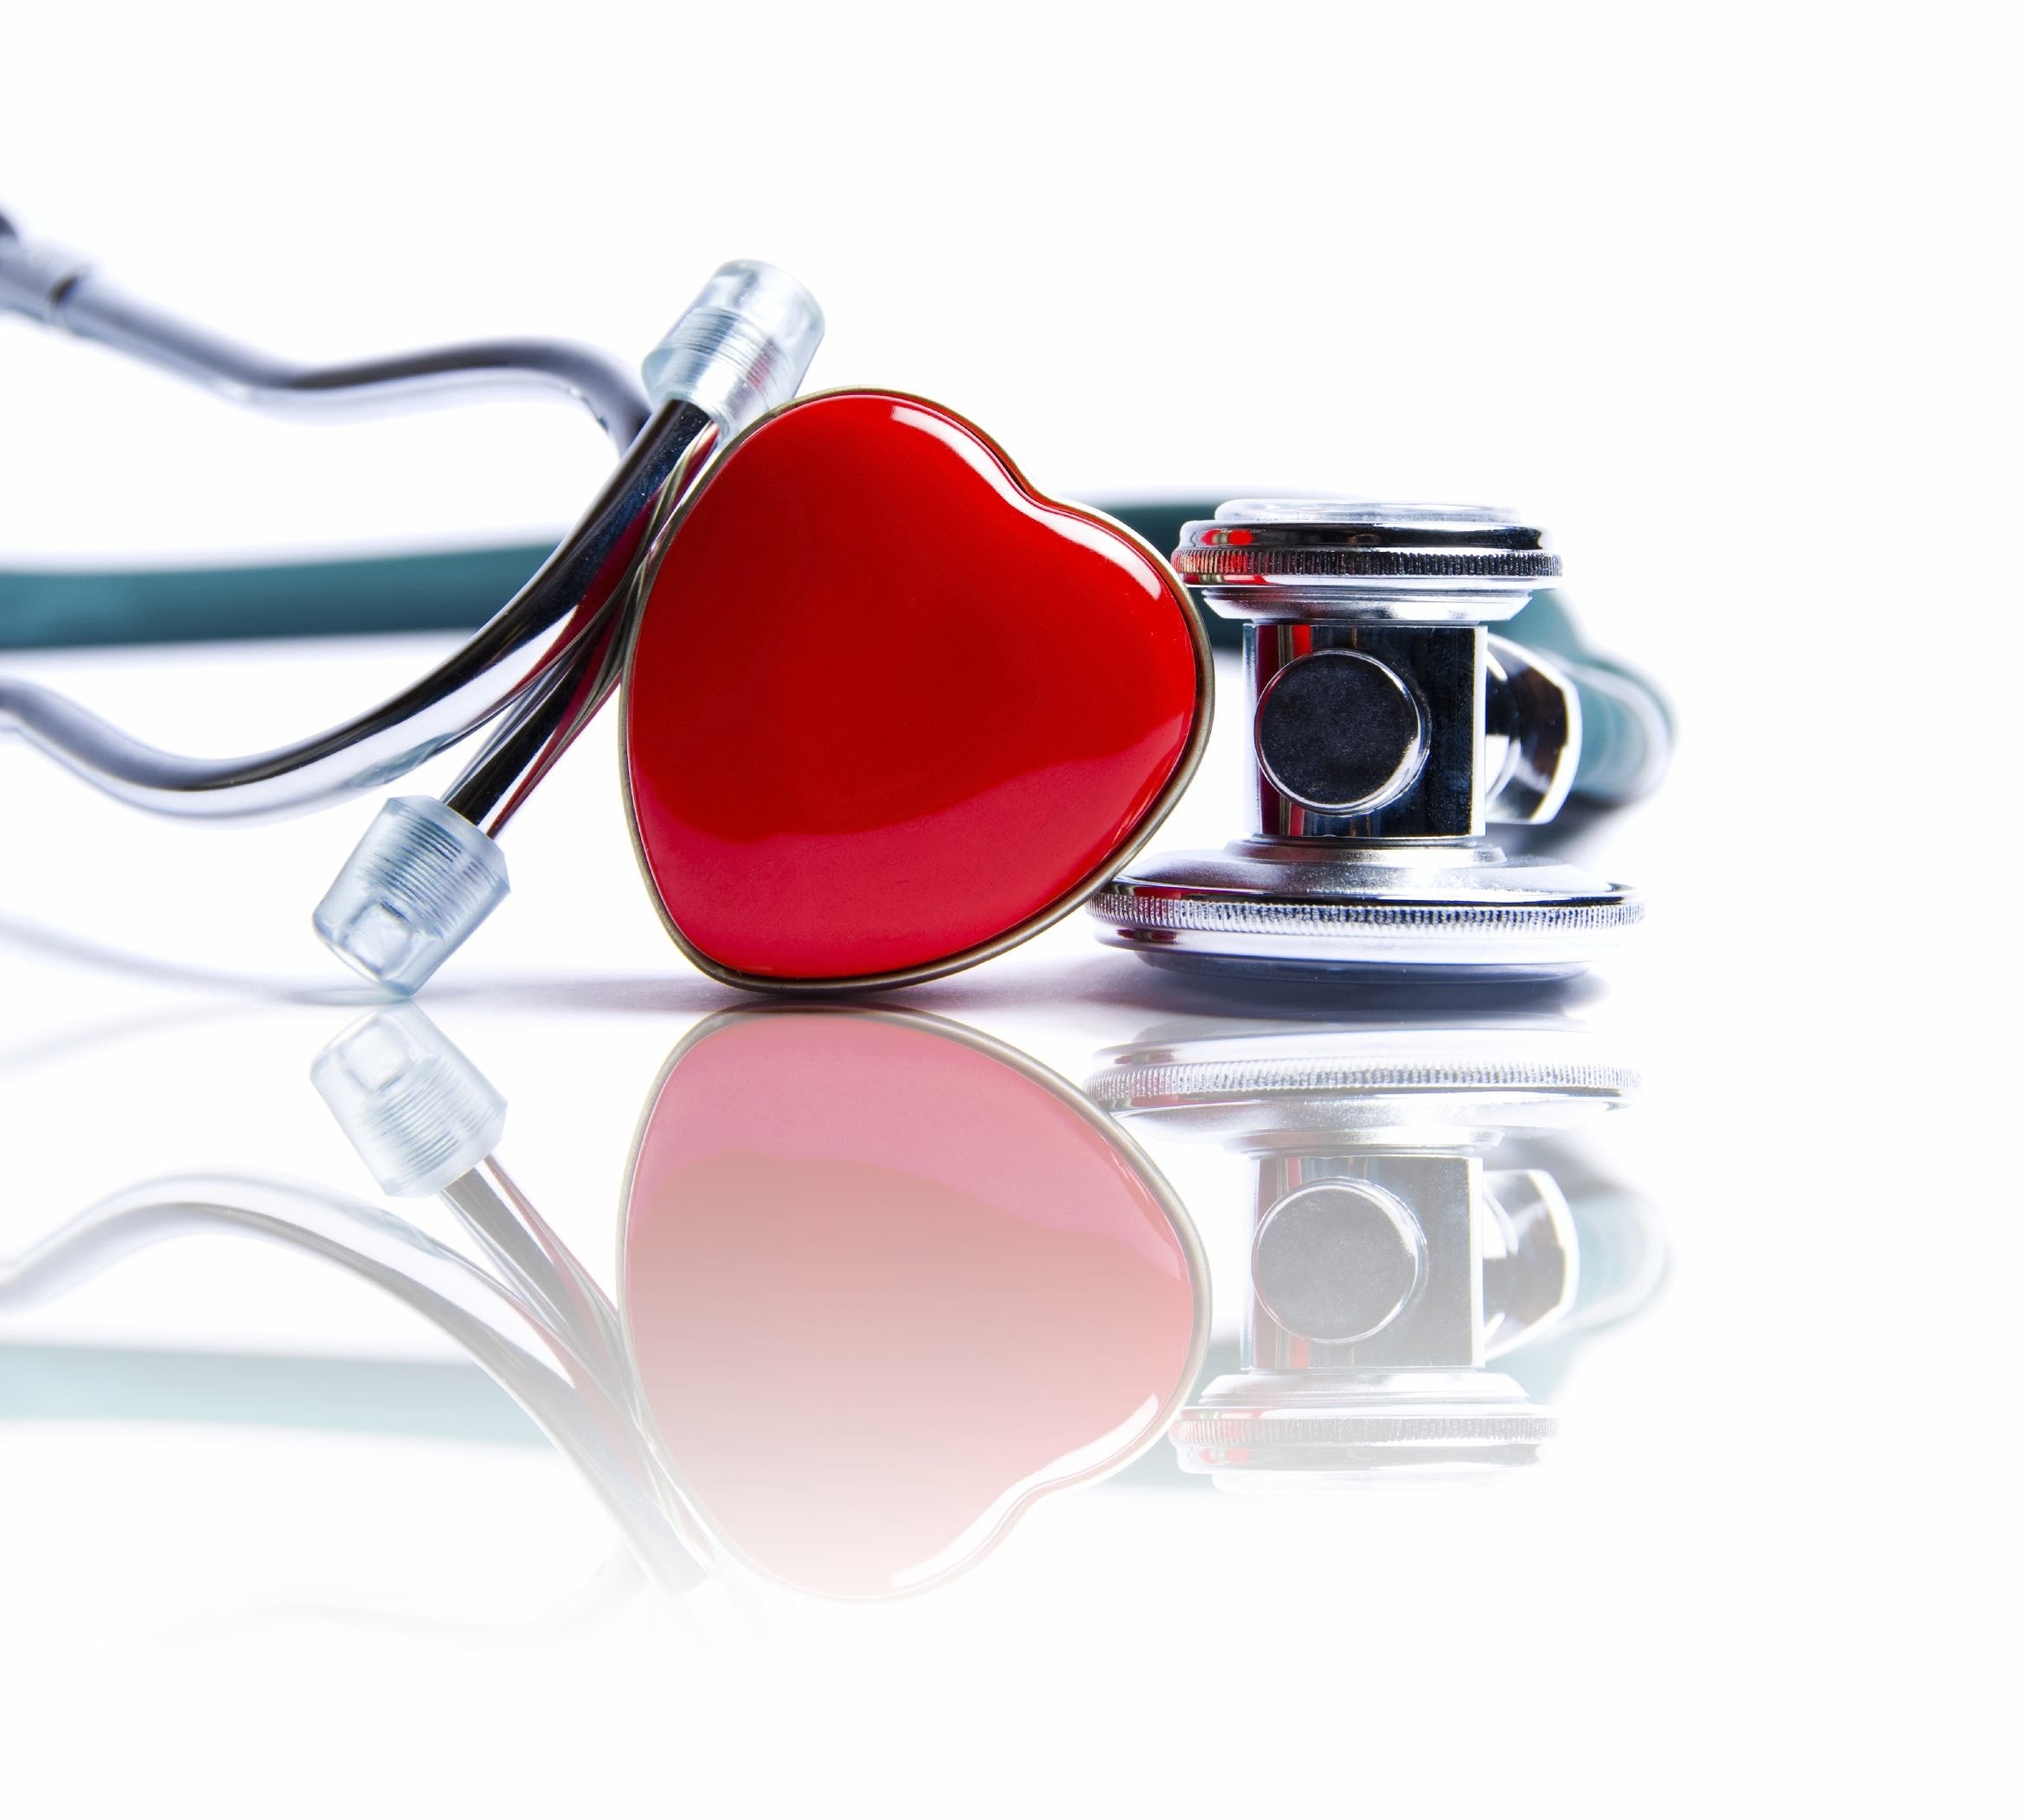 Image of stethoscope and heart with reflection